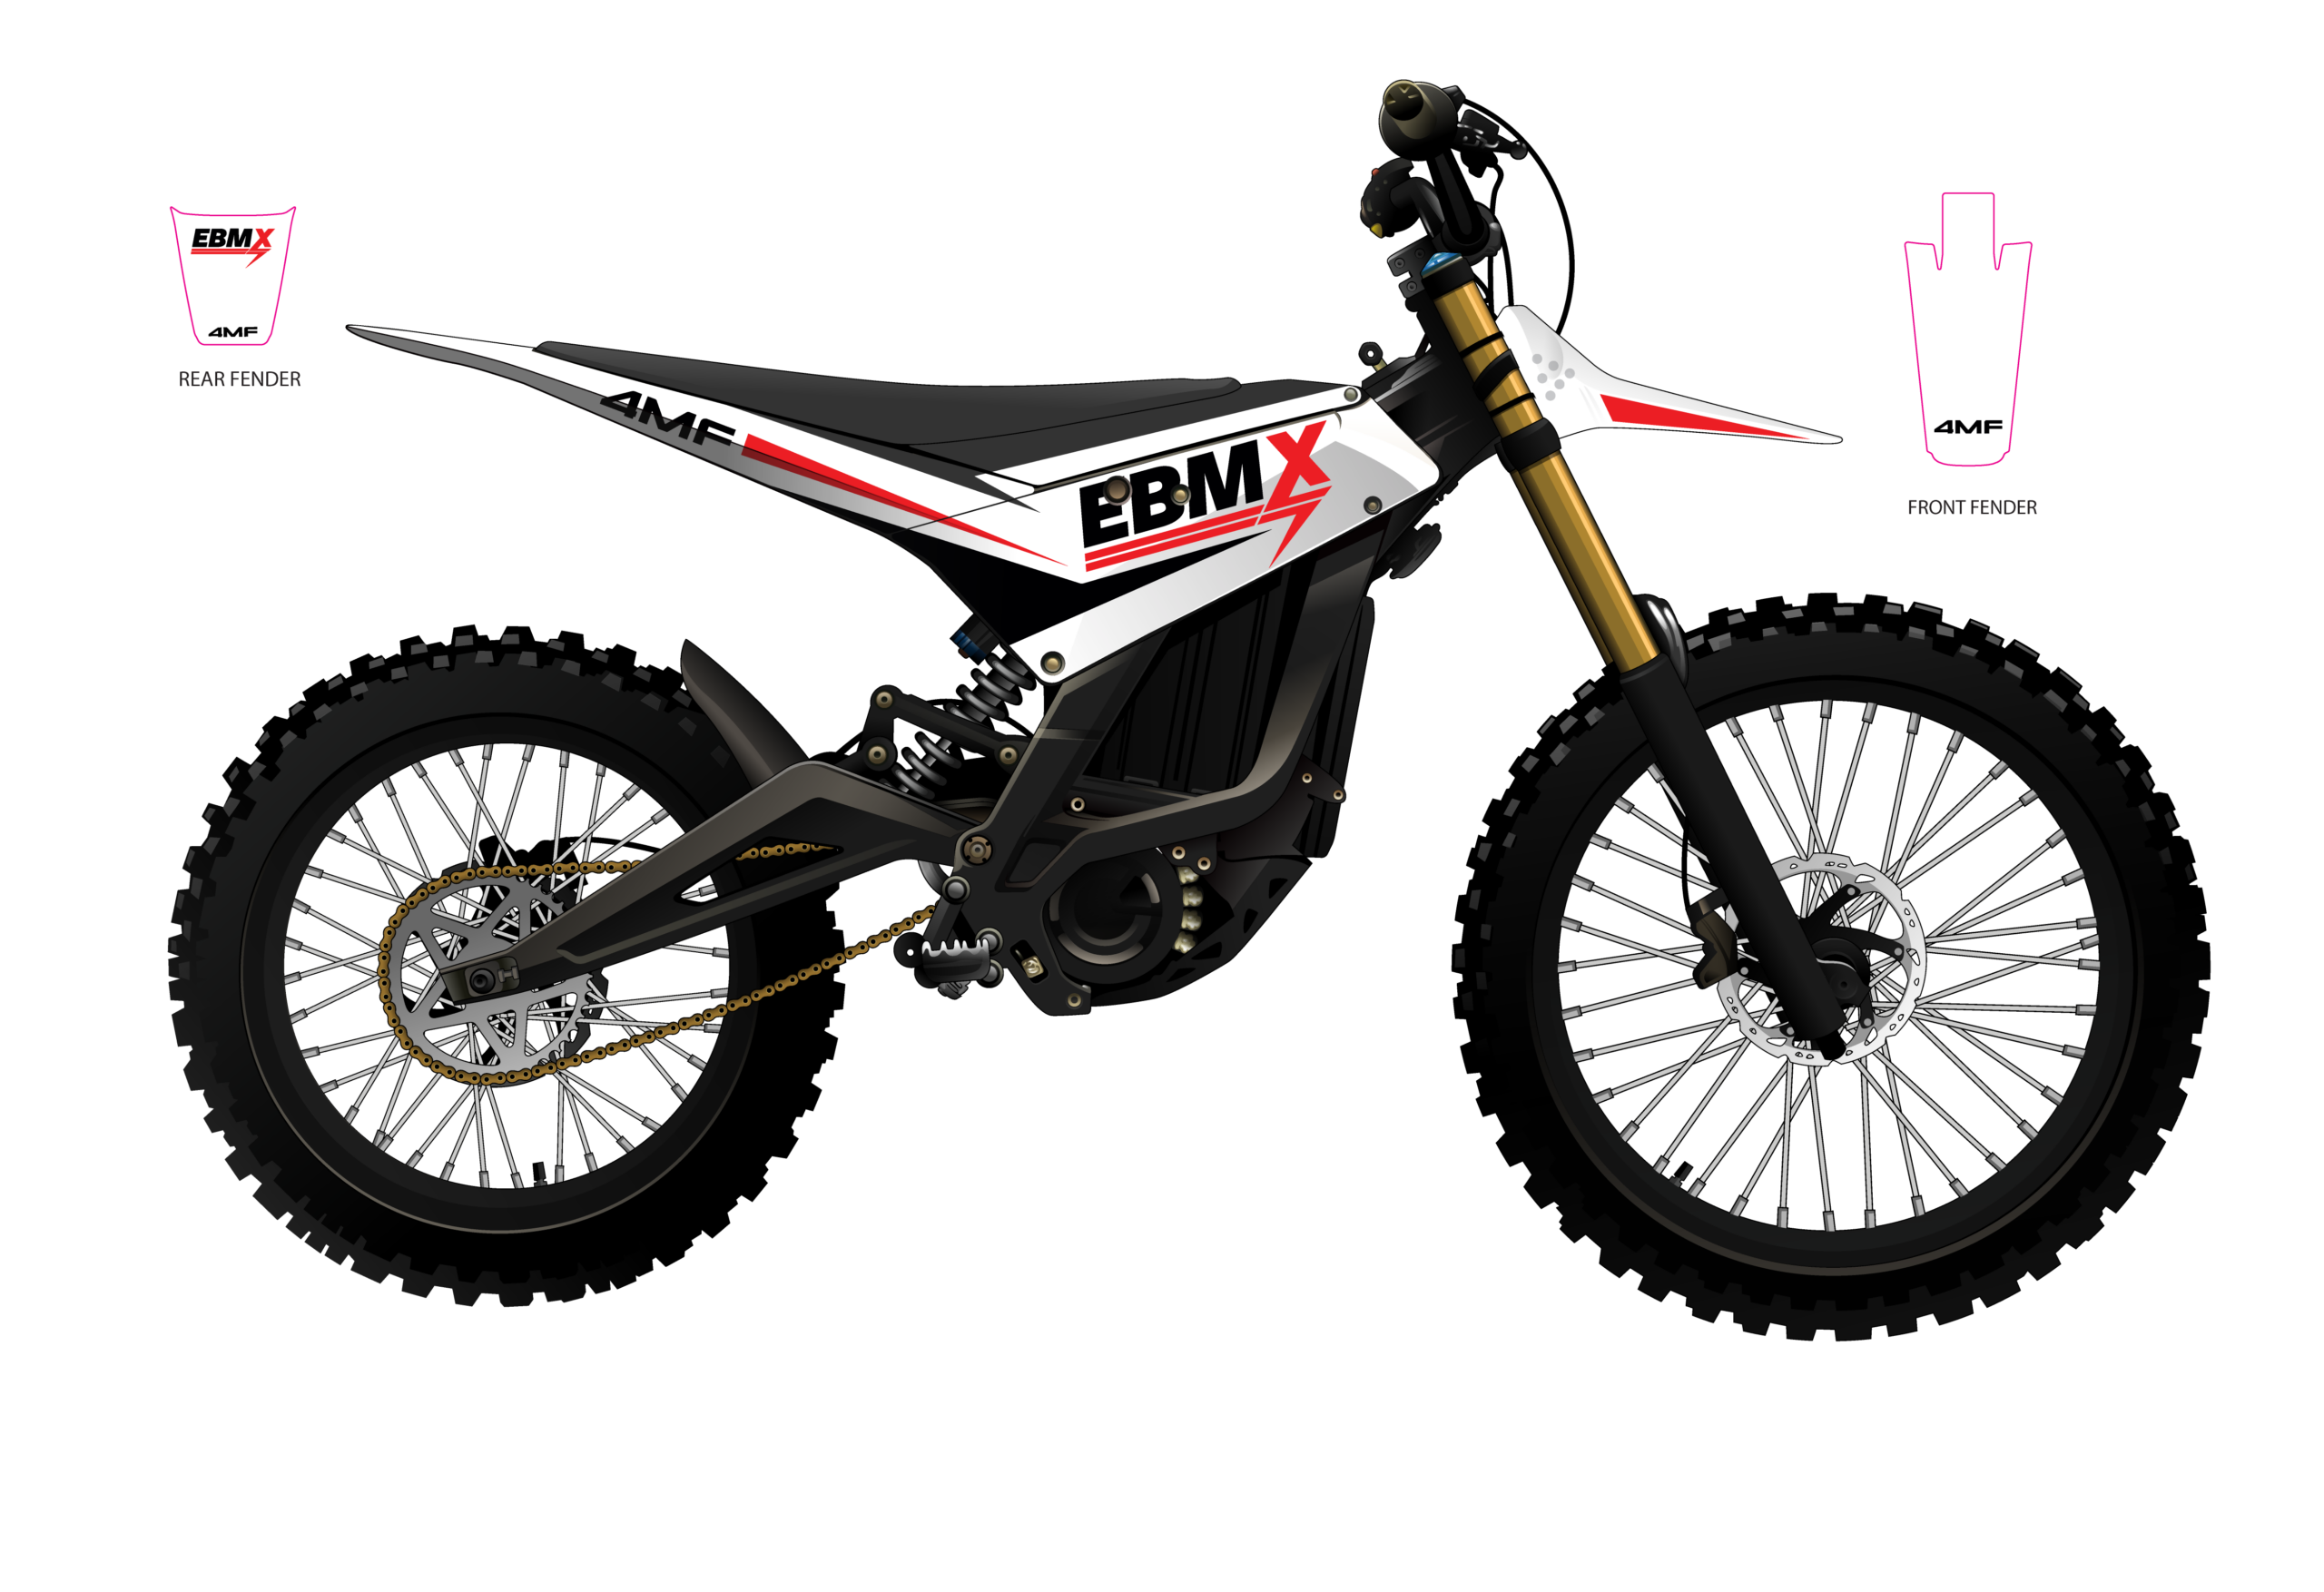 4M Foundry Moto Kits And 180 Decals for Surron